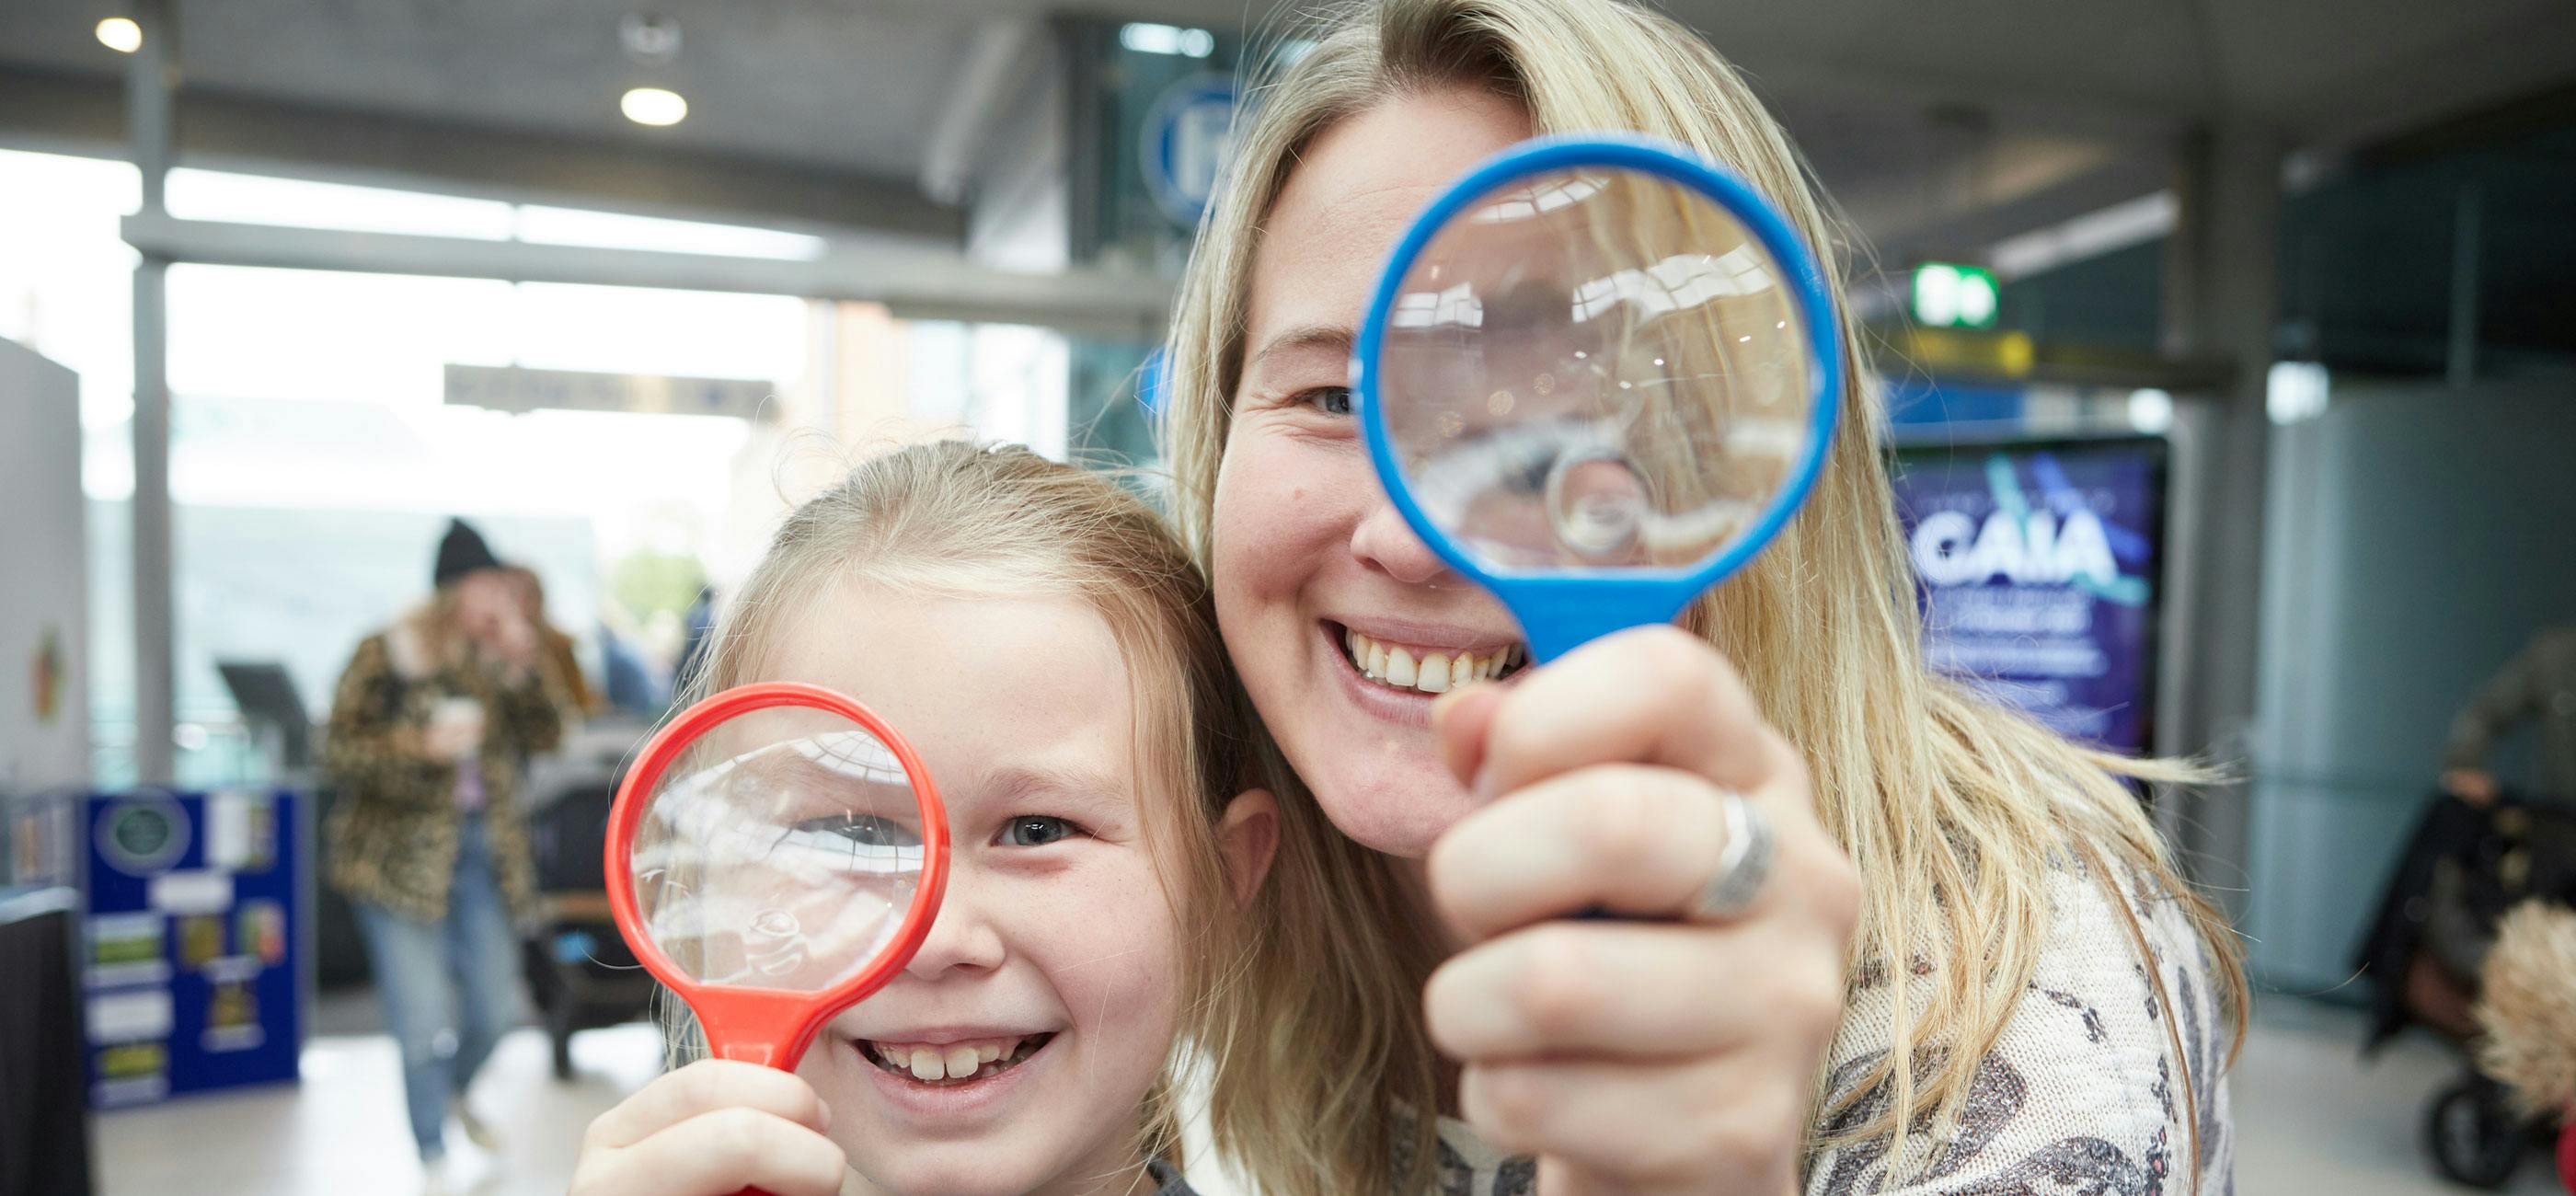 Magnifying science - women and child at NSF 2021 - credit Keiron Tovell